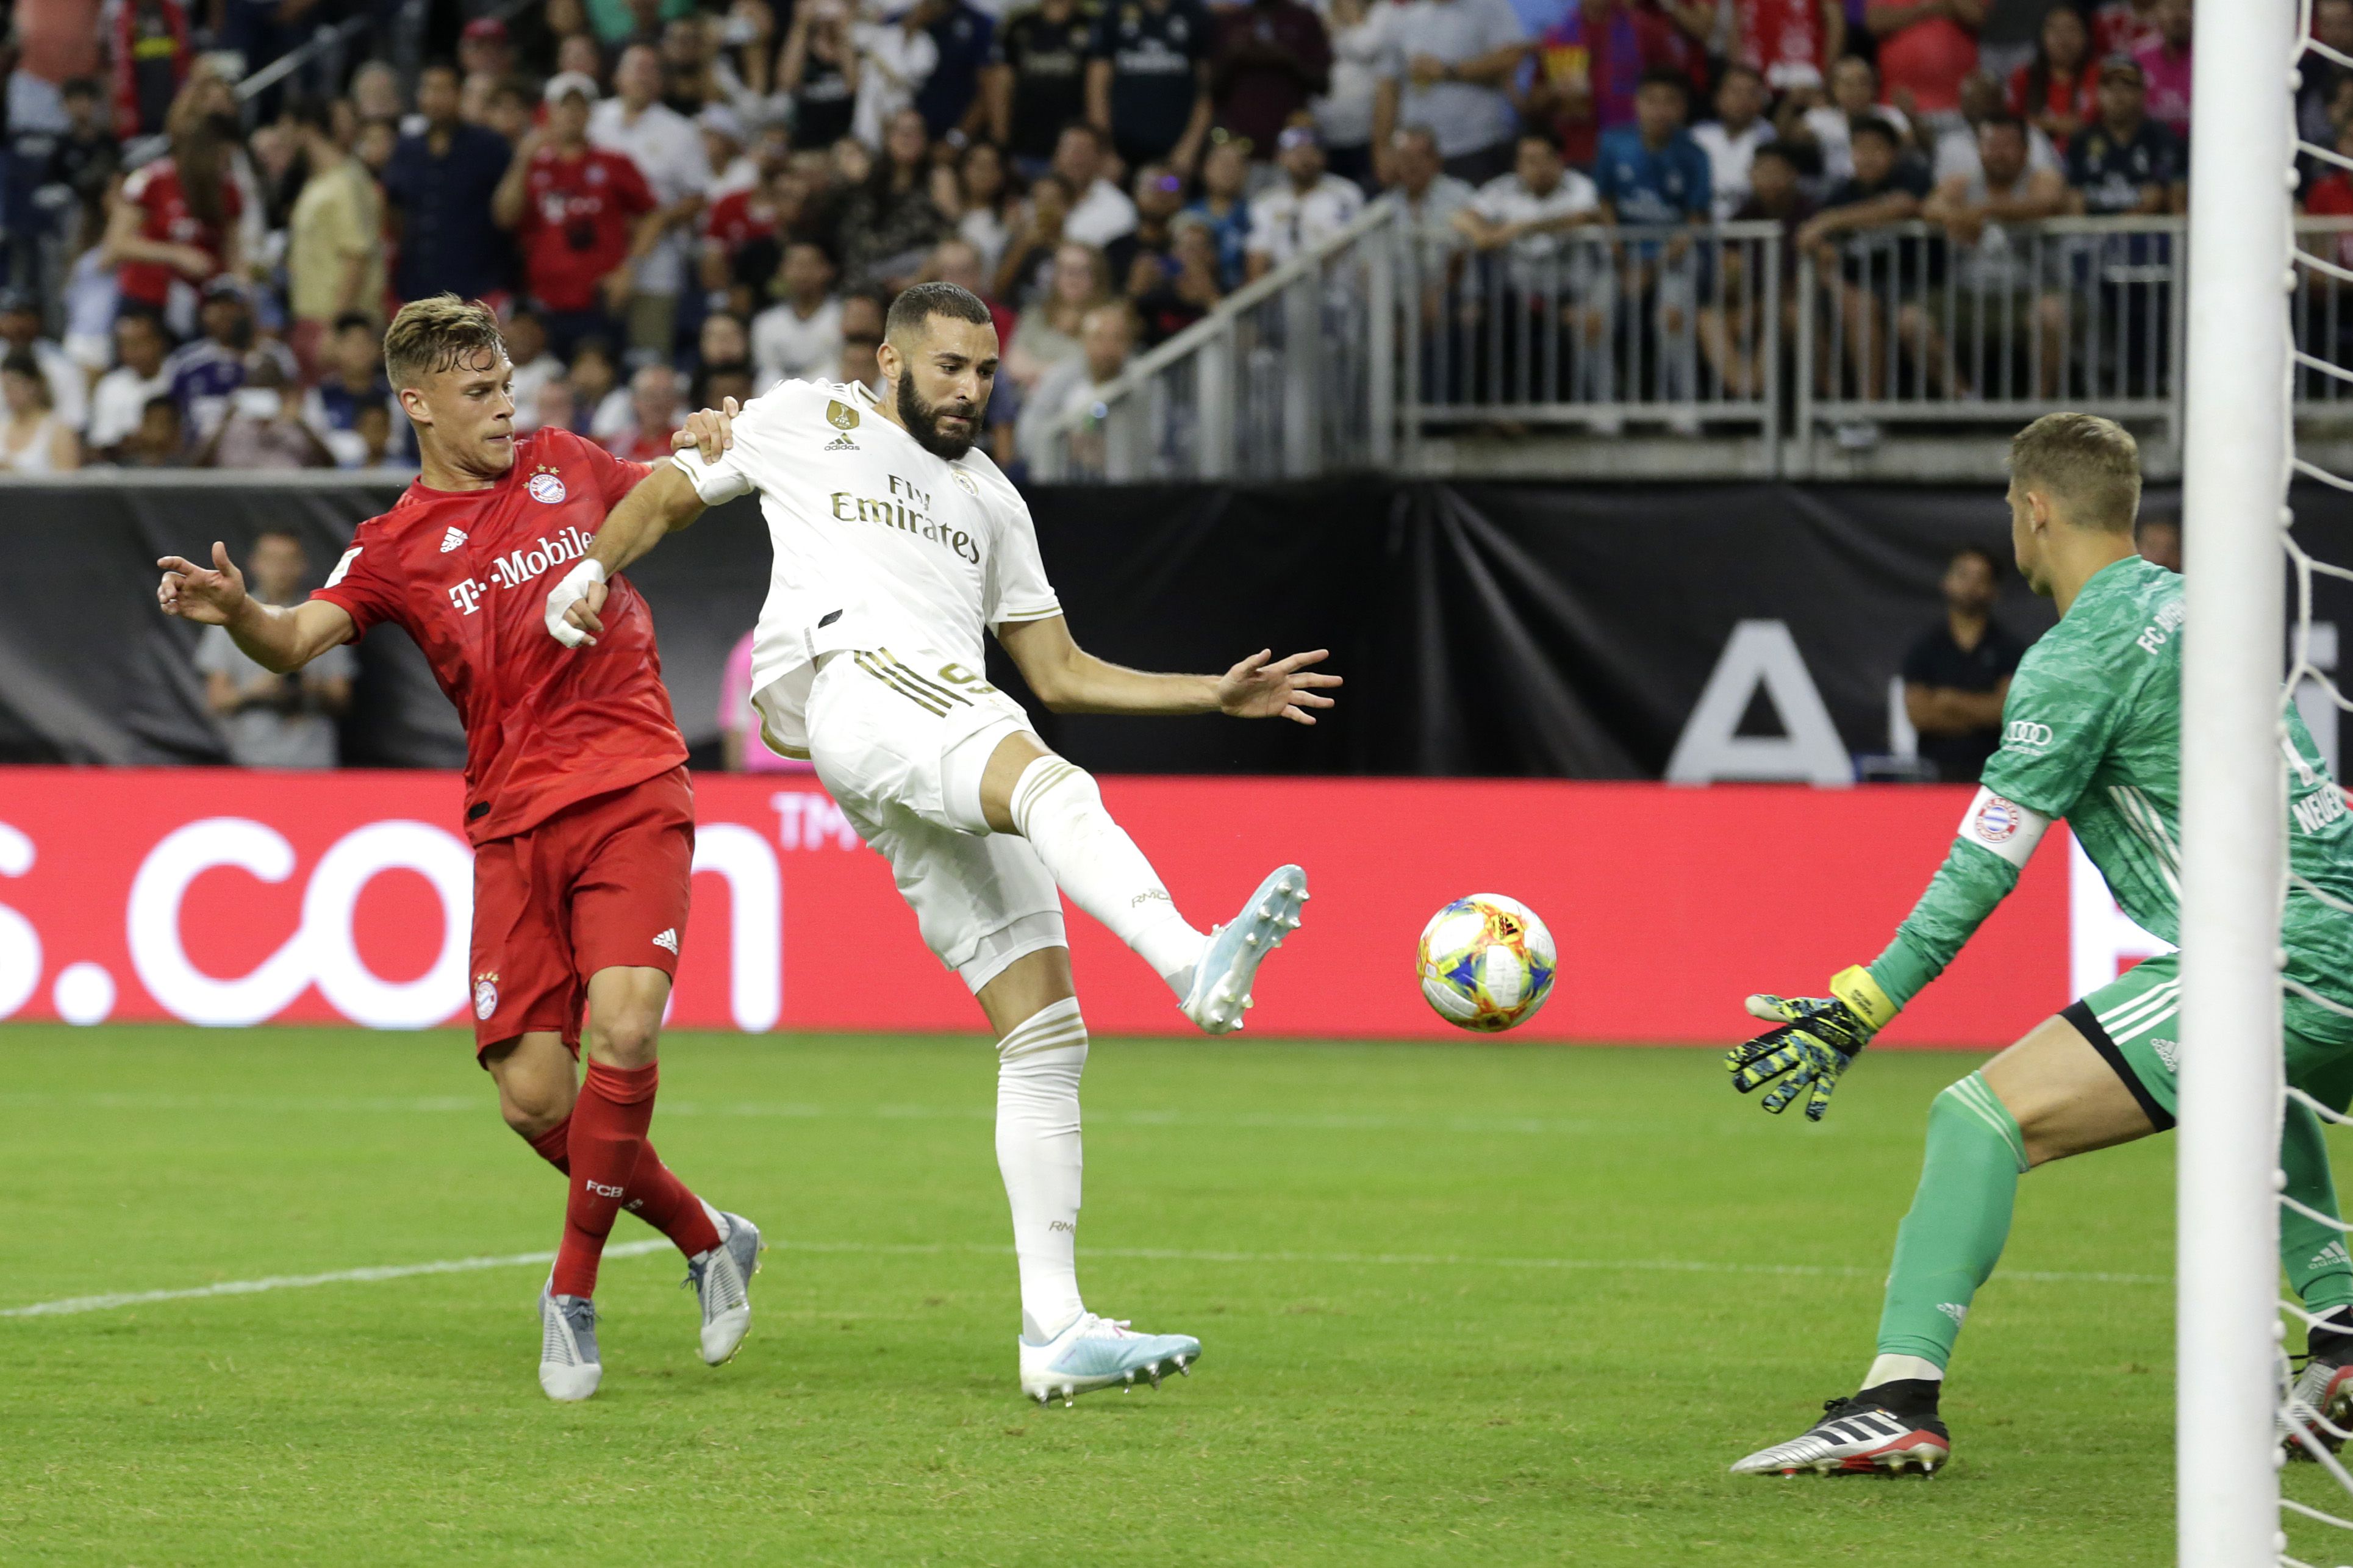 Karim Benzema #9 of Real Madrid shoots the ball against Manuel Neuer #1 of Bayern Munich during the first half in the 2019 International Champions Cup at NRG Stadium in Houston, Texas. 